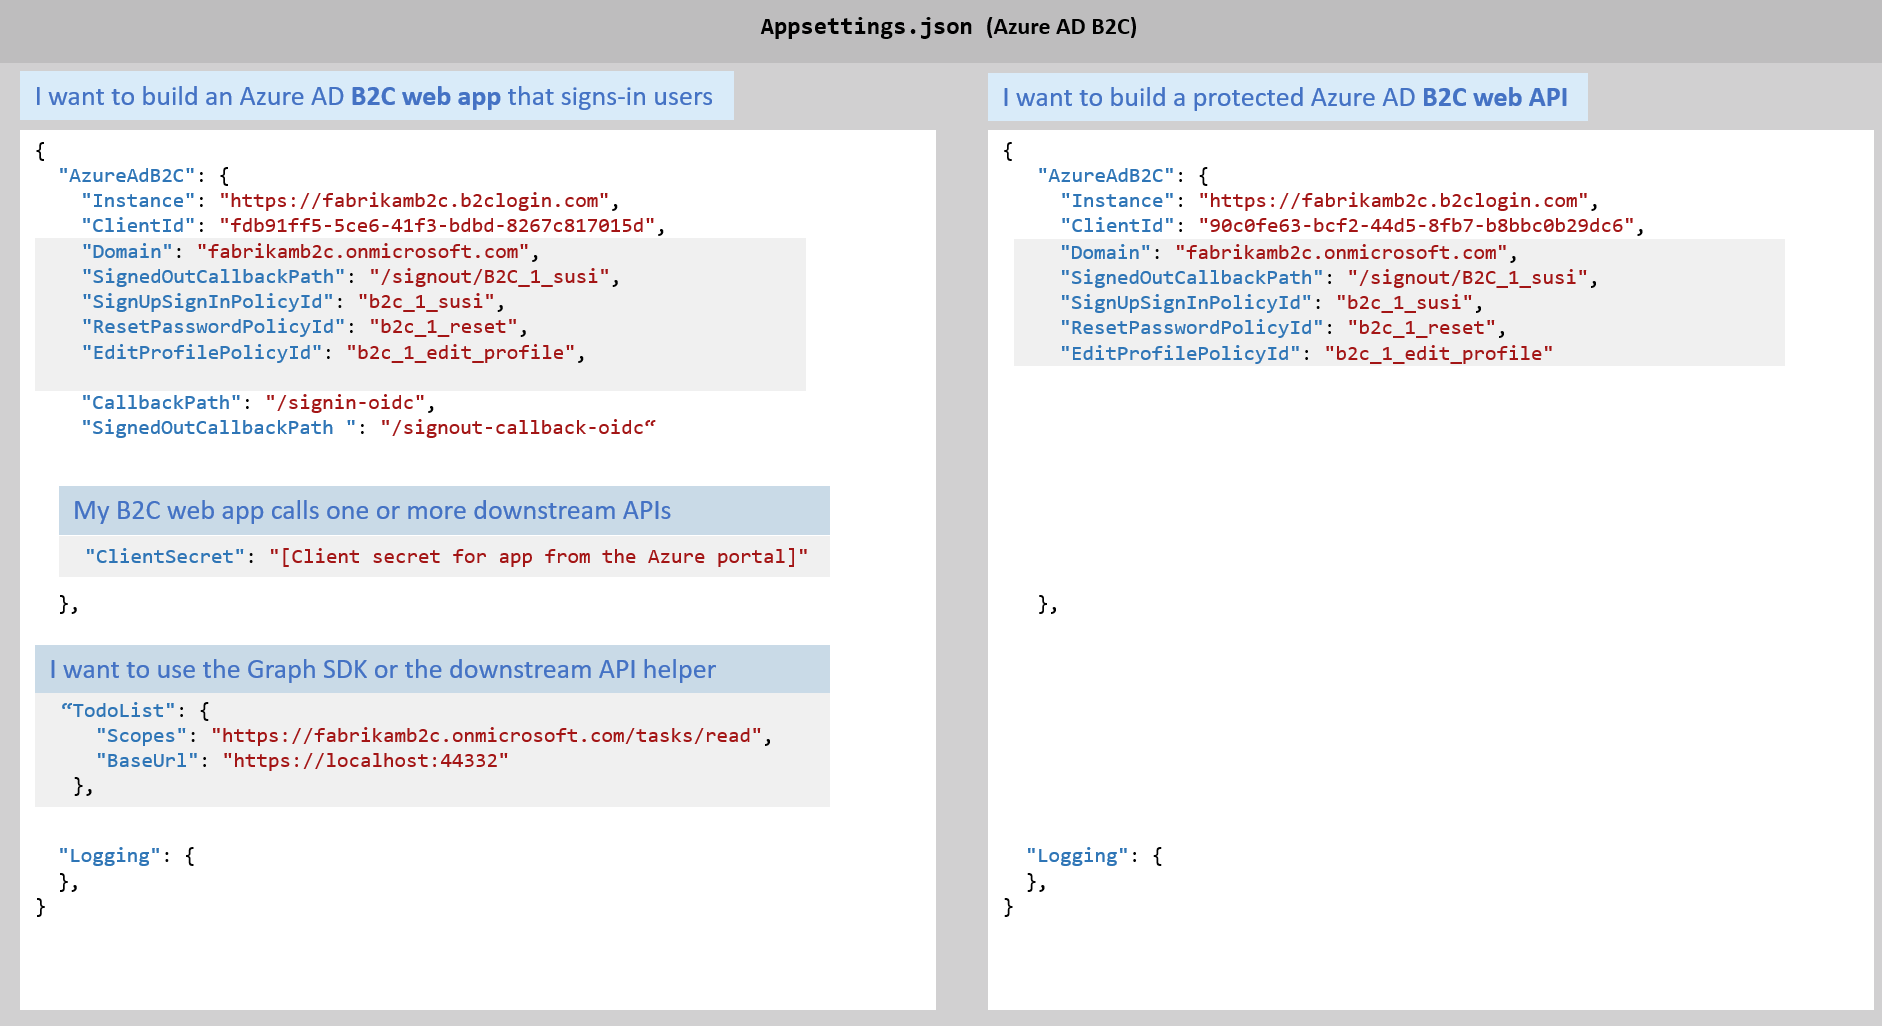 image showing code updates for a B2C web app that signs in users and a protected web API